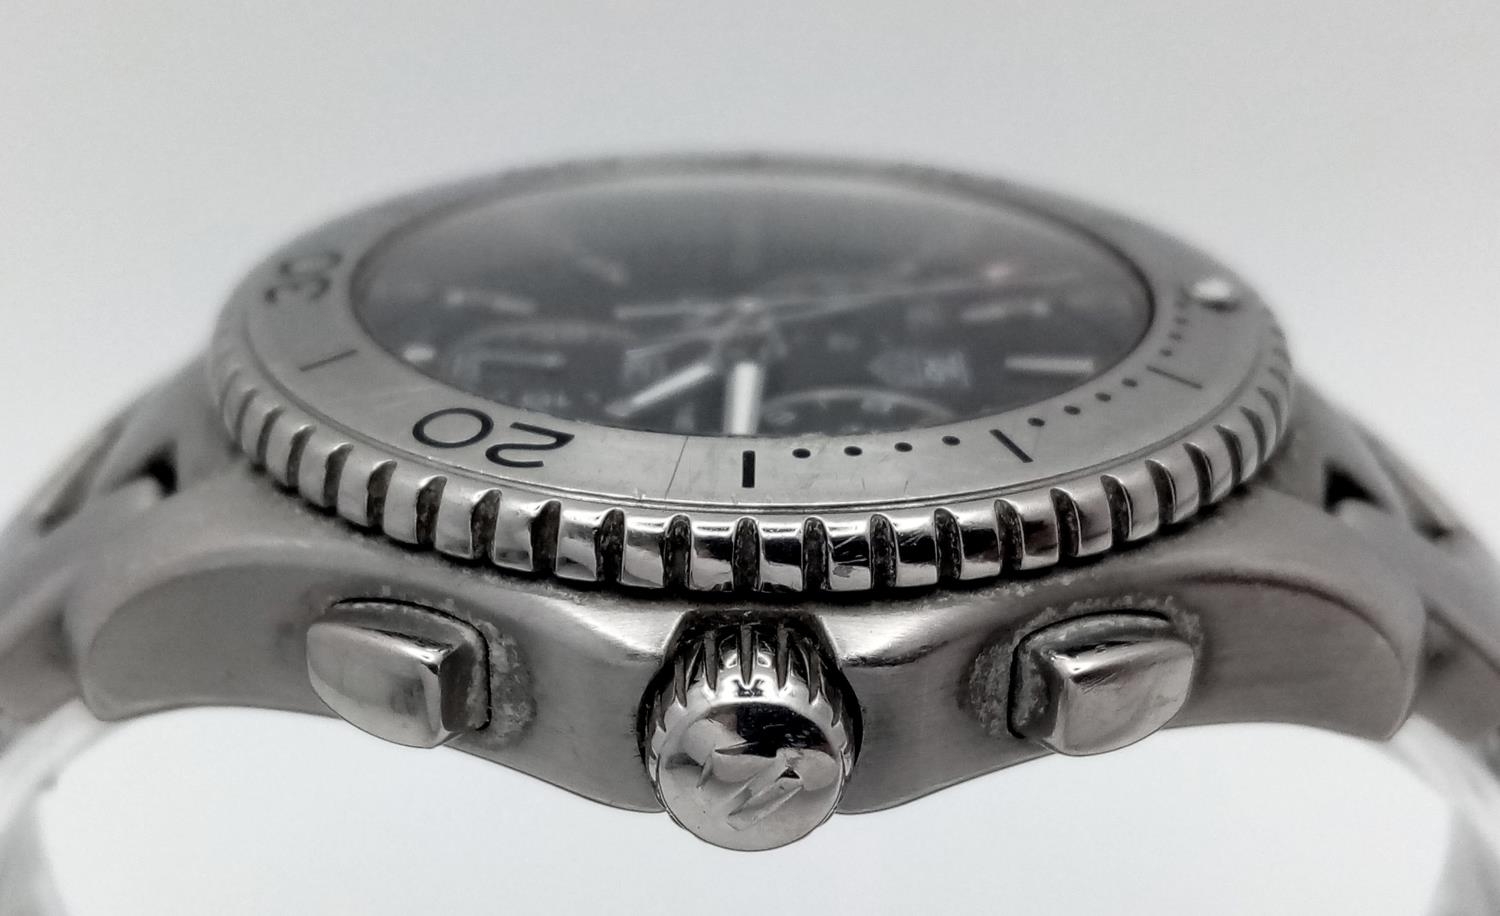 A Tag Heuer Link Quartz Chronograph Gents Watch. Stainless steel bracelet and case - 42mm. Black - Image 5 of 8